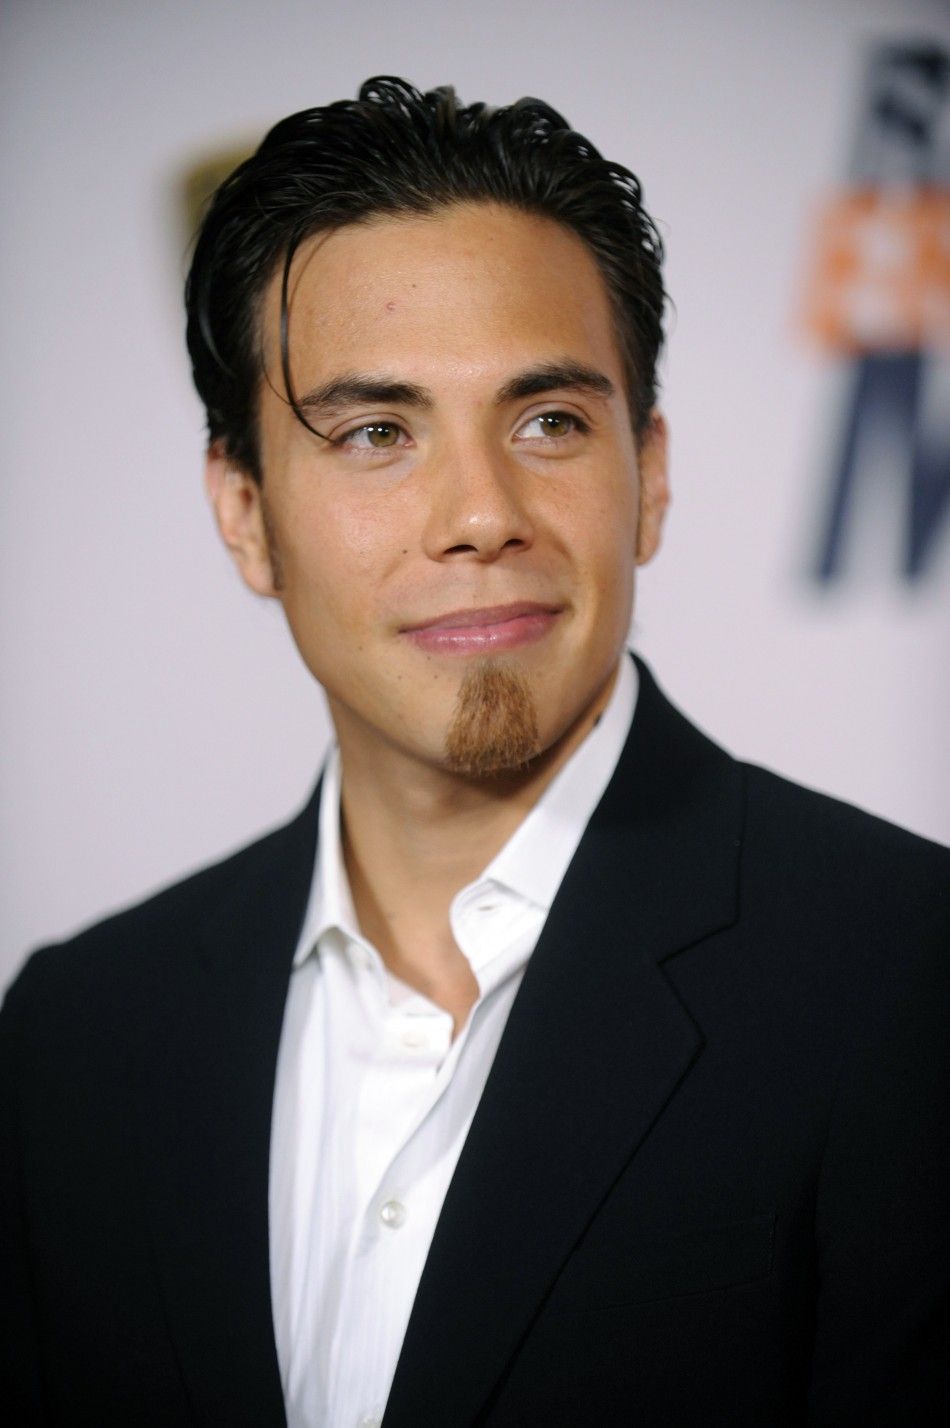 Olympic gold medalist Apolo Anton Ohno attends the 17th annual Race to Erase MS gala in Los Angeles